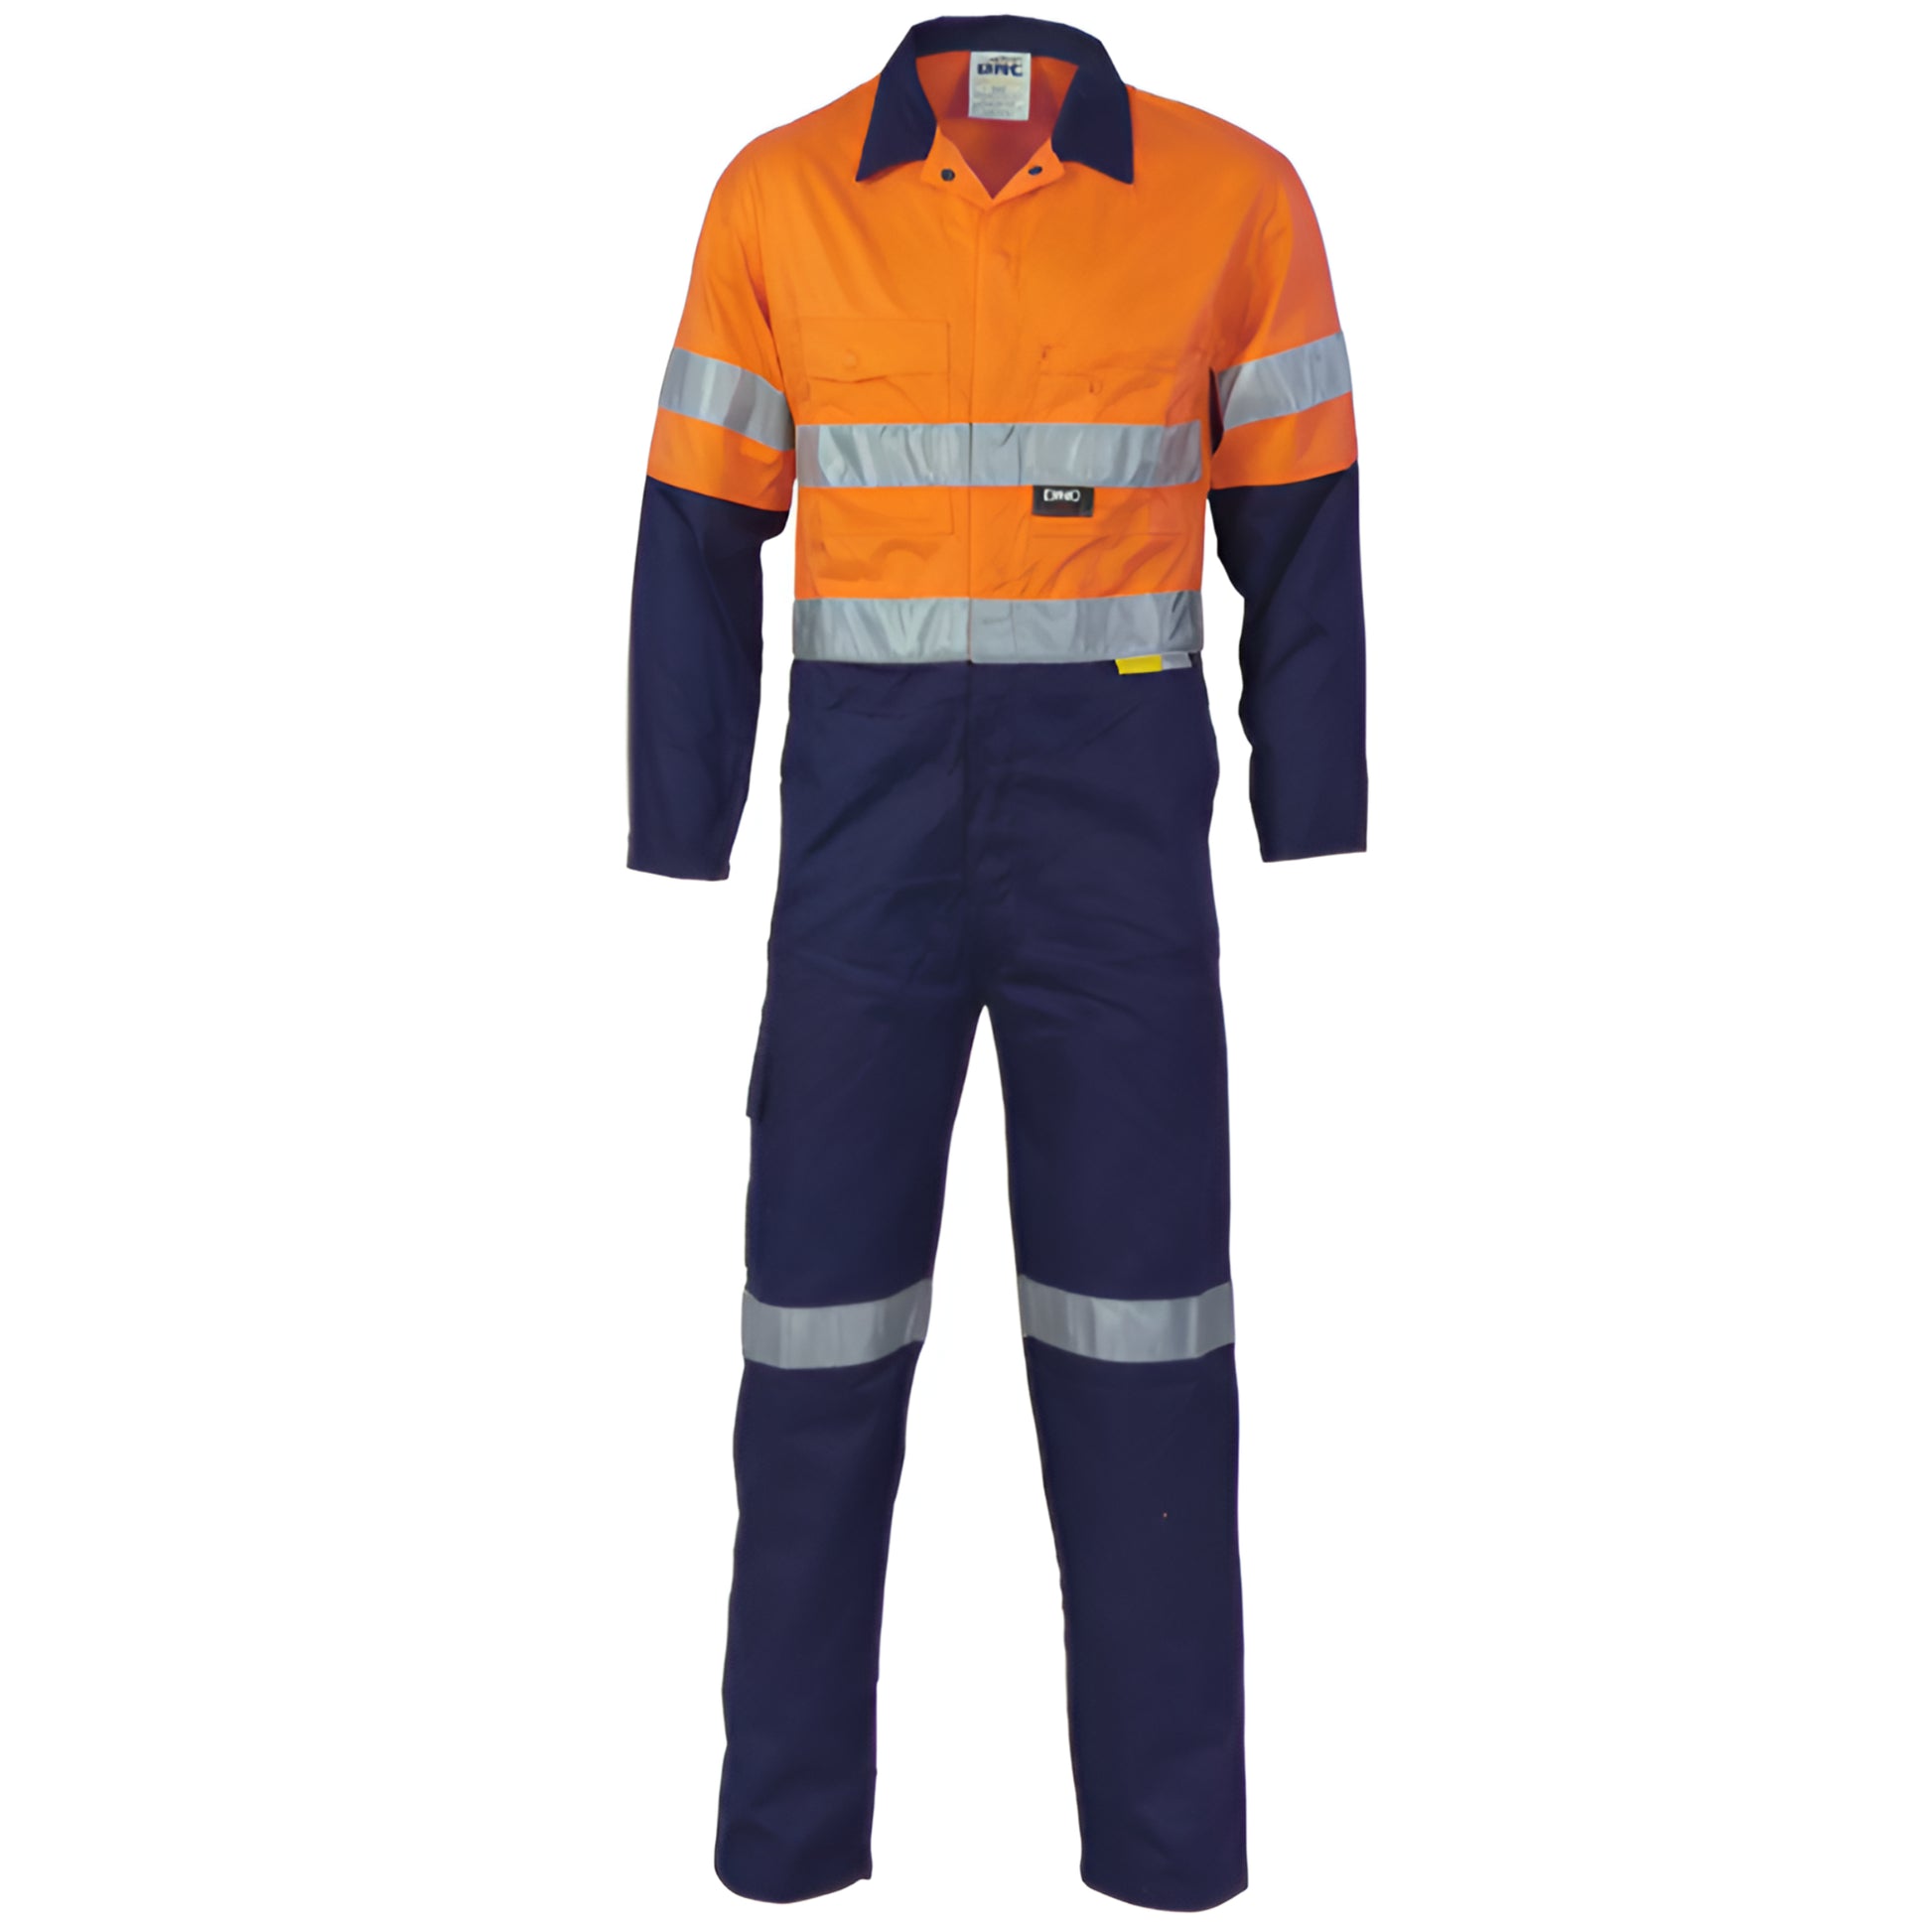 DNC 3955 190gsm Hoop Reflective Cotton Drill Coveralls Orange Navy 2.1 kg Yellow/Navy